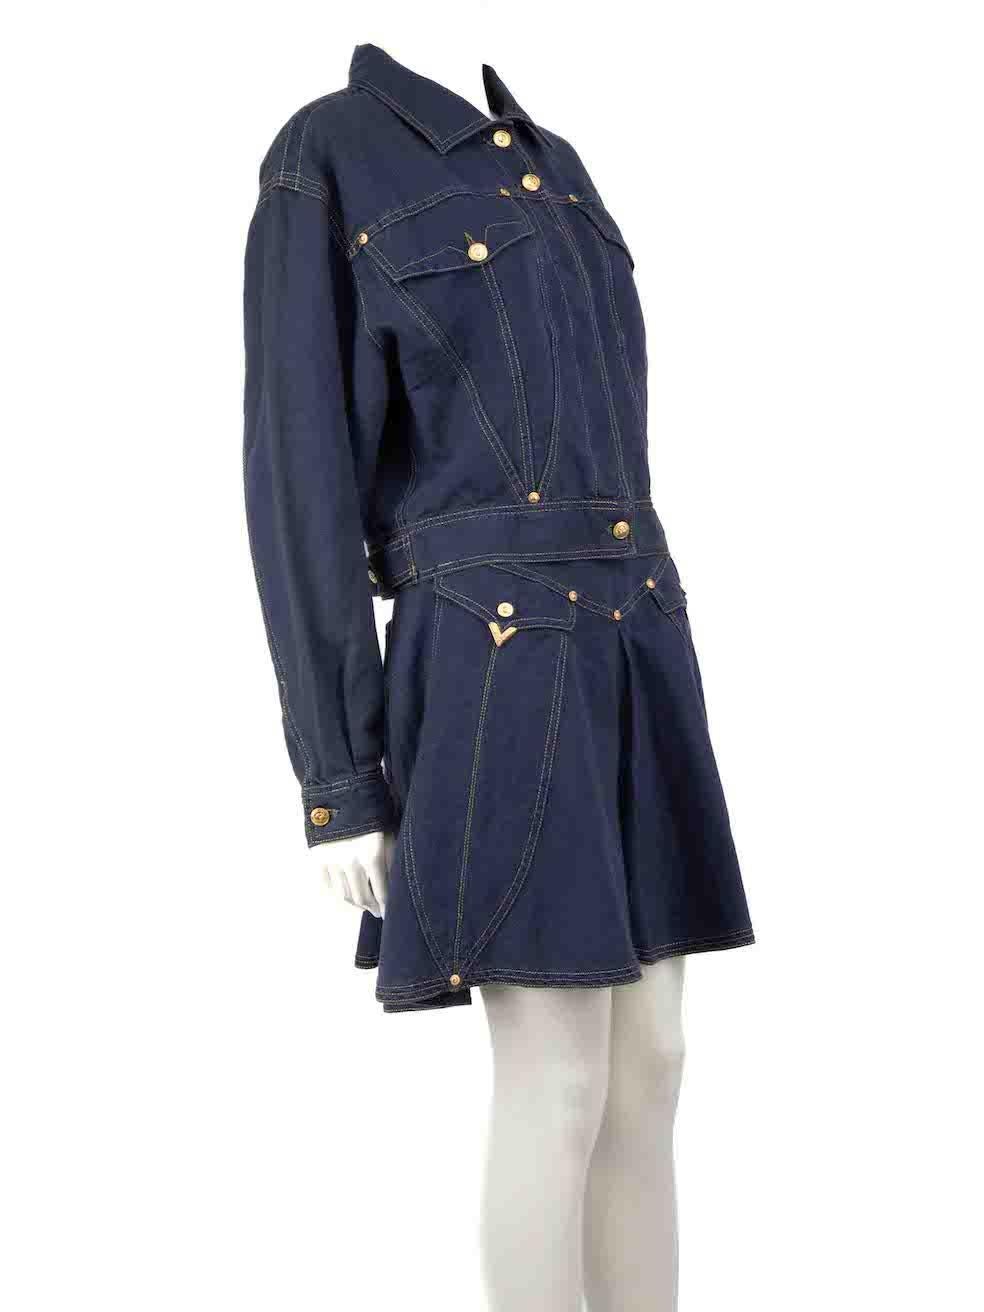 CONDITION is Very good. Hardly any visible wear to set is evident on this used Versace designer resale item.
 
 
 
 Details
 
 
 Blue
 
 Linen
 
 Jacket and skirt set
 
 Yellow contrast stitch
 
 Cropped jacket
 
 Button up fastening
 
 Long